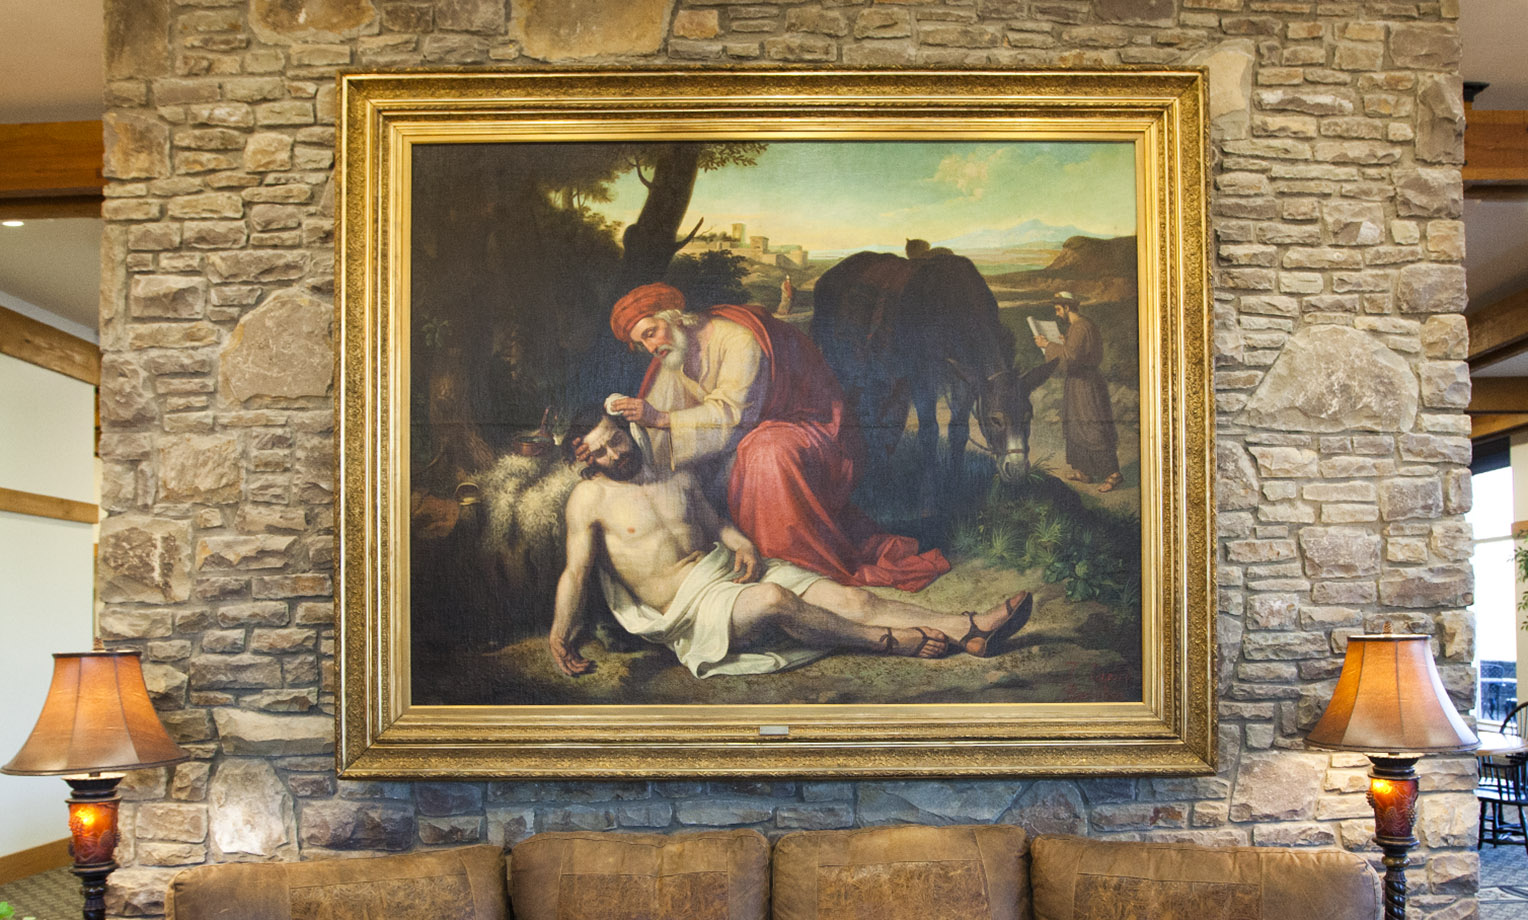 “La Caridad del Samaritano” literally translated, “The Charity of the Samaritan” is an oil painting by Spaniard Jose Tapiro y Baro (1863-1913) depicting the story of the Good Samaritan from Luke 10:30-37. A gift to Samaritan's Purse in 2011 from the Gamboa Family Trust, the work of art is a reminder to all of Christ’s followers to “Go and do likewise.” This painting hangs at the entrance to the Furman Building at the ministry's international headquarters in Boone.